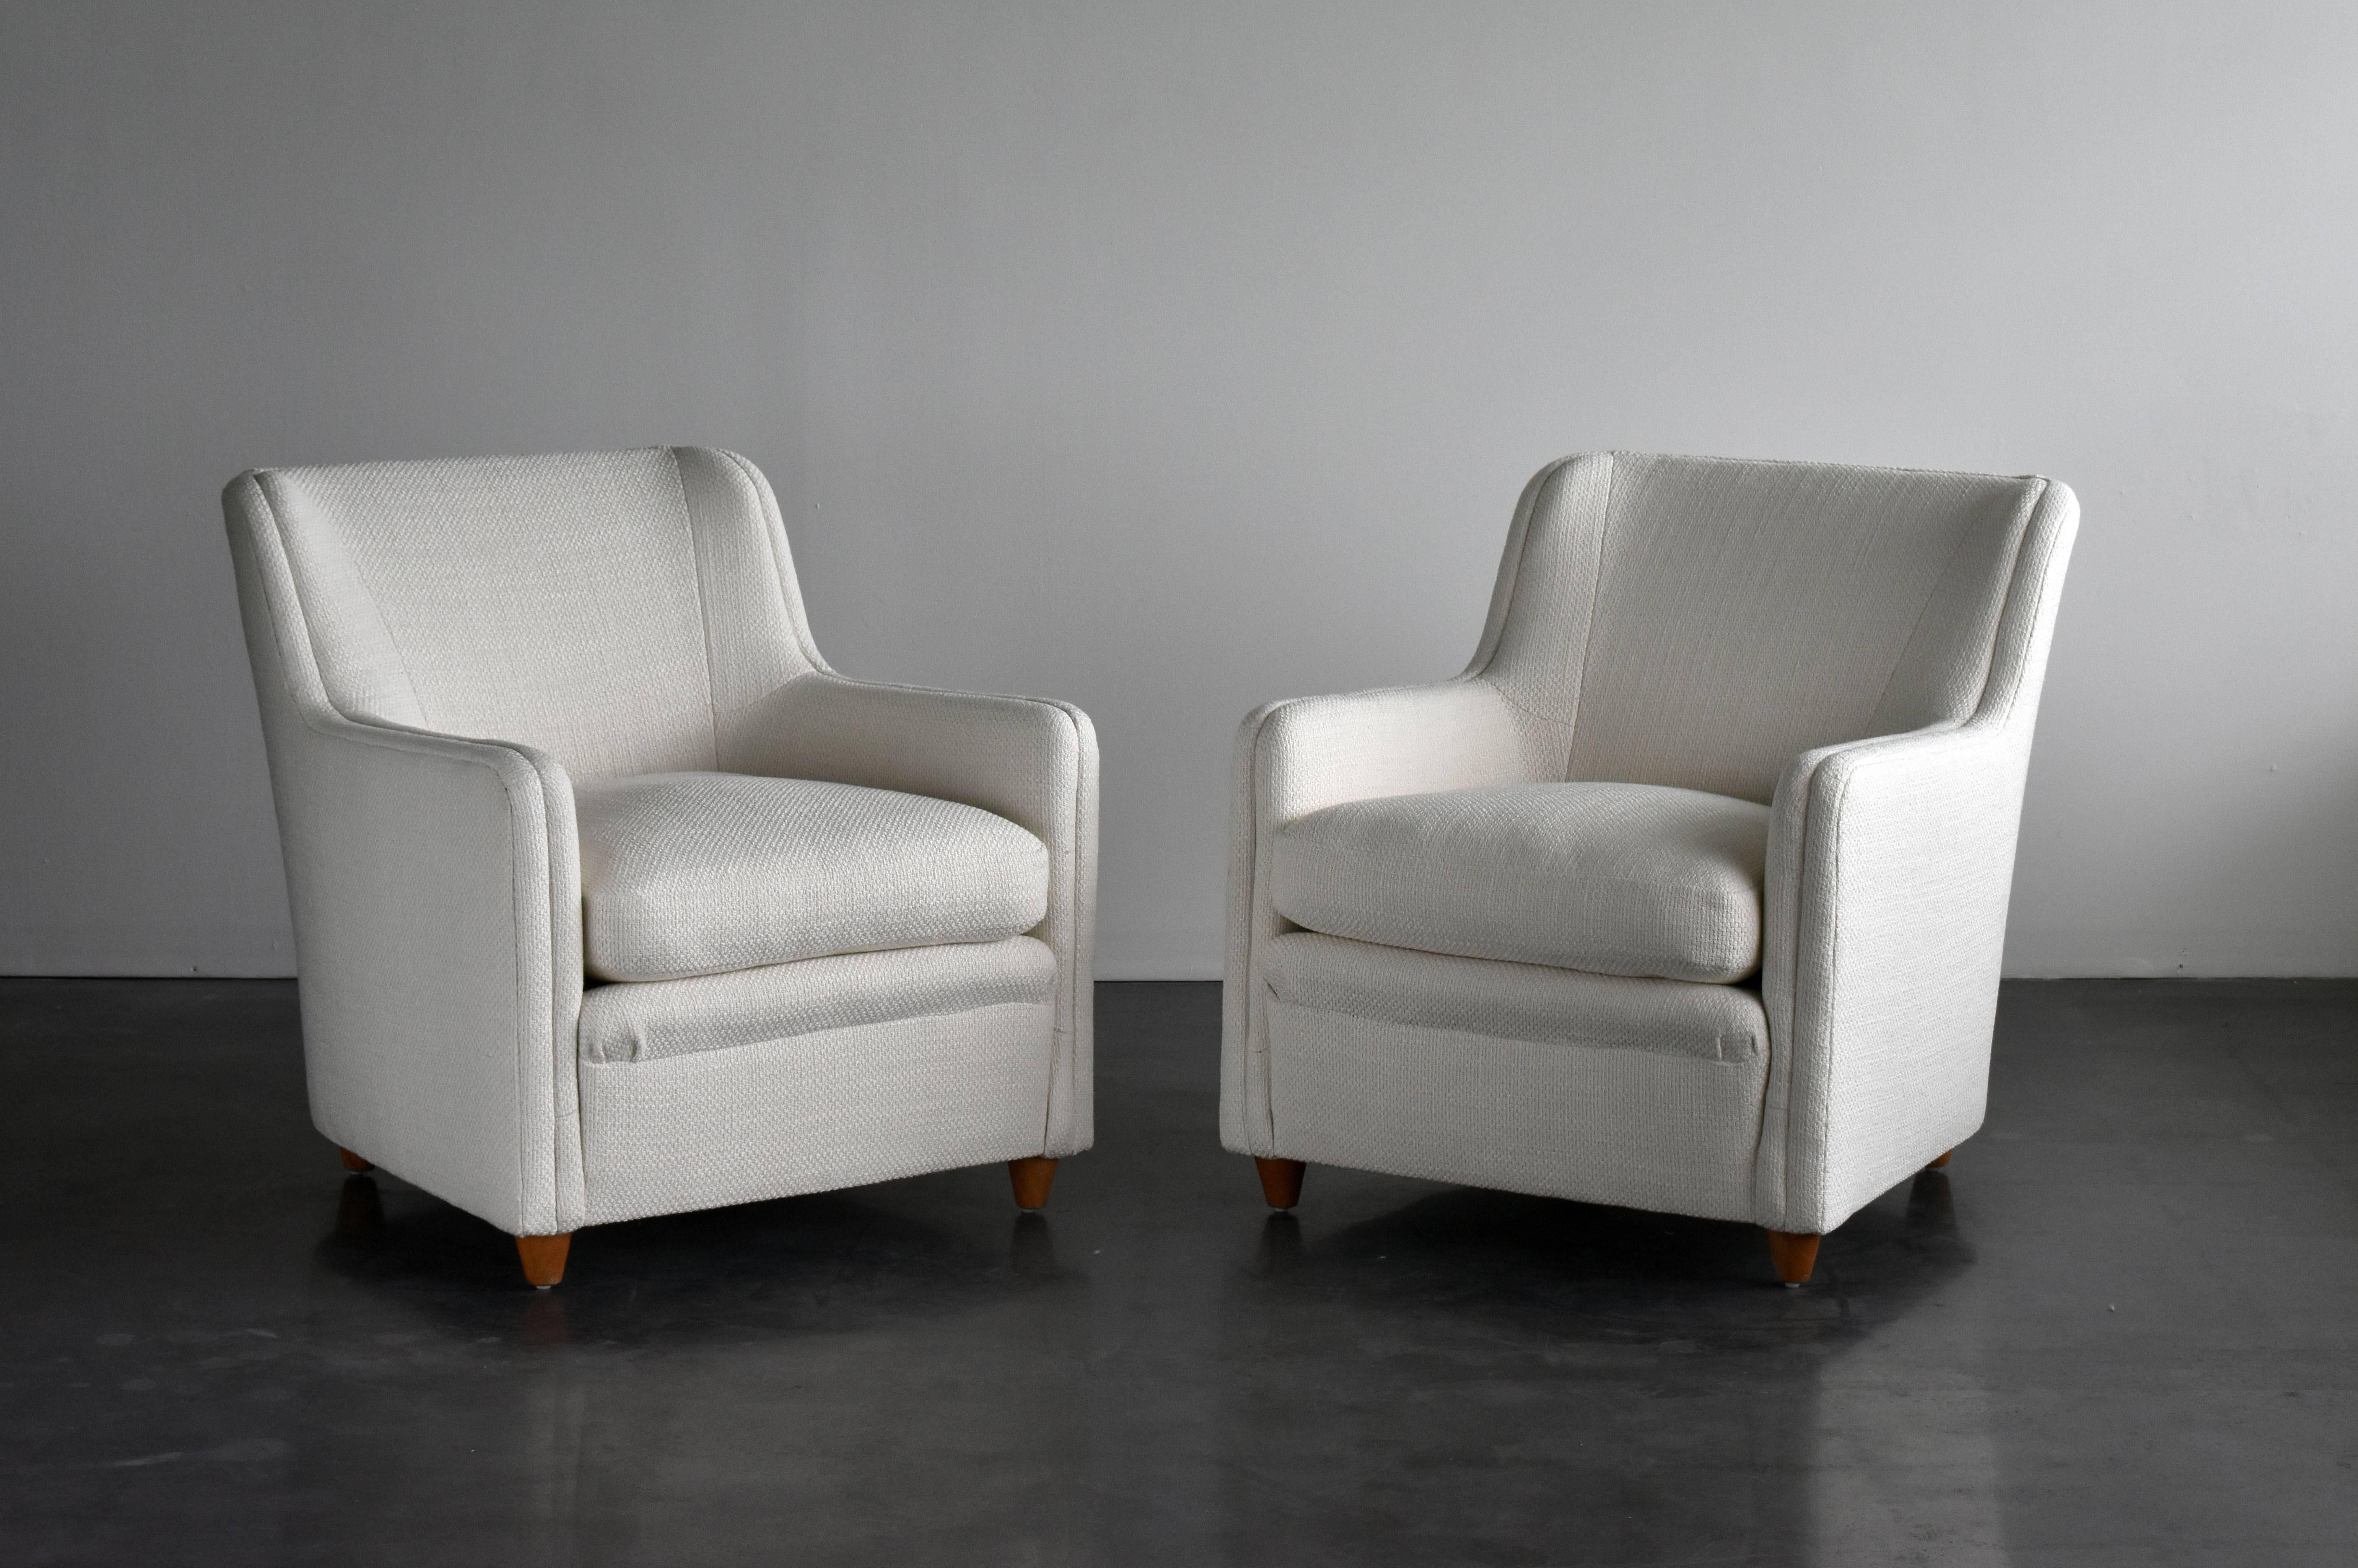 A pair of rare and comfortable modernist lounge chairs by Italian designer Gio Ponti. Designed in the 1940s. Upholstered in brand new off-white chenille fabric. 

Designed for the oceanliner Transatlantico Conte Grande, this model chair was also